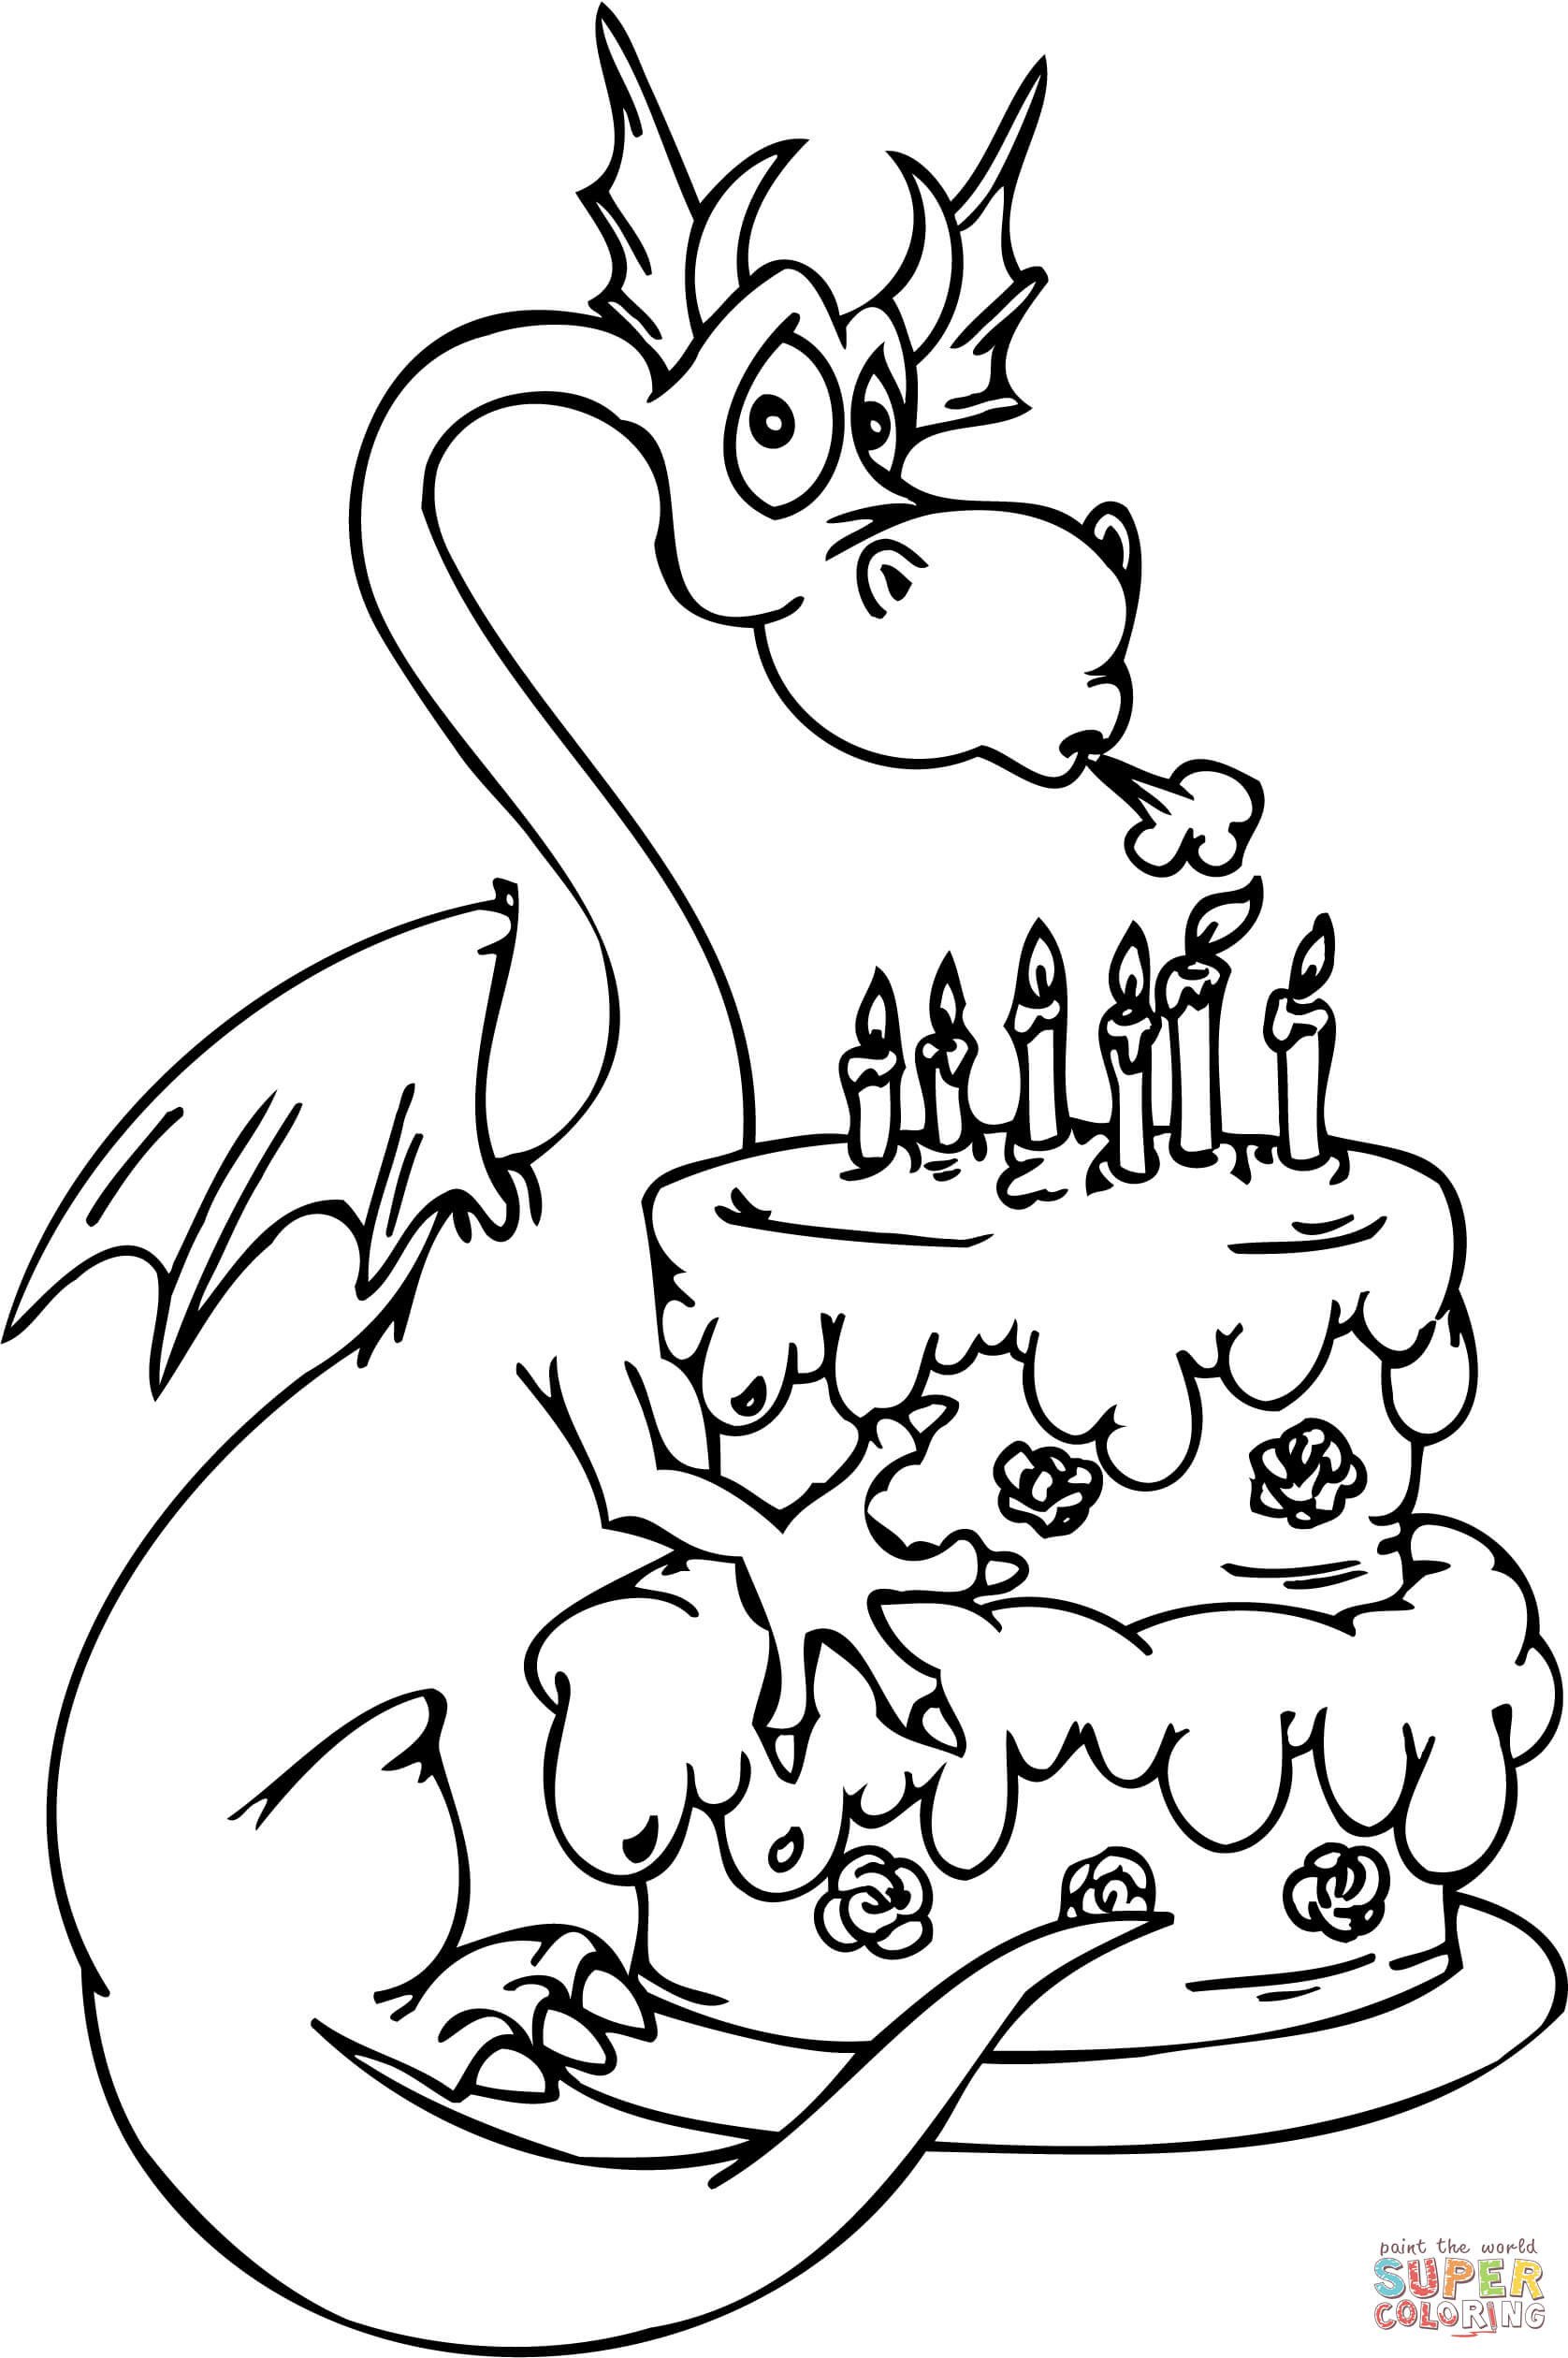 Dragon with Happy Birthday Cake coloring page